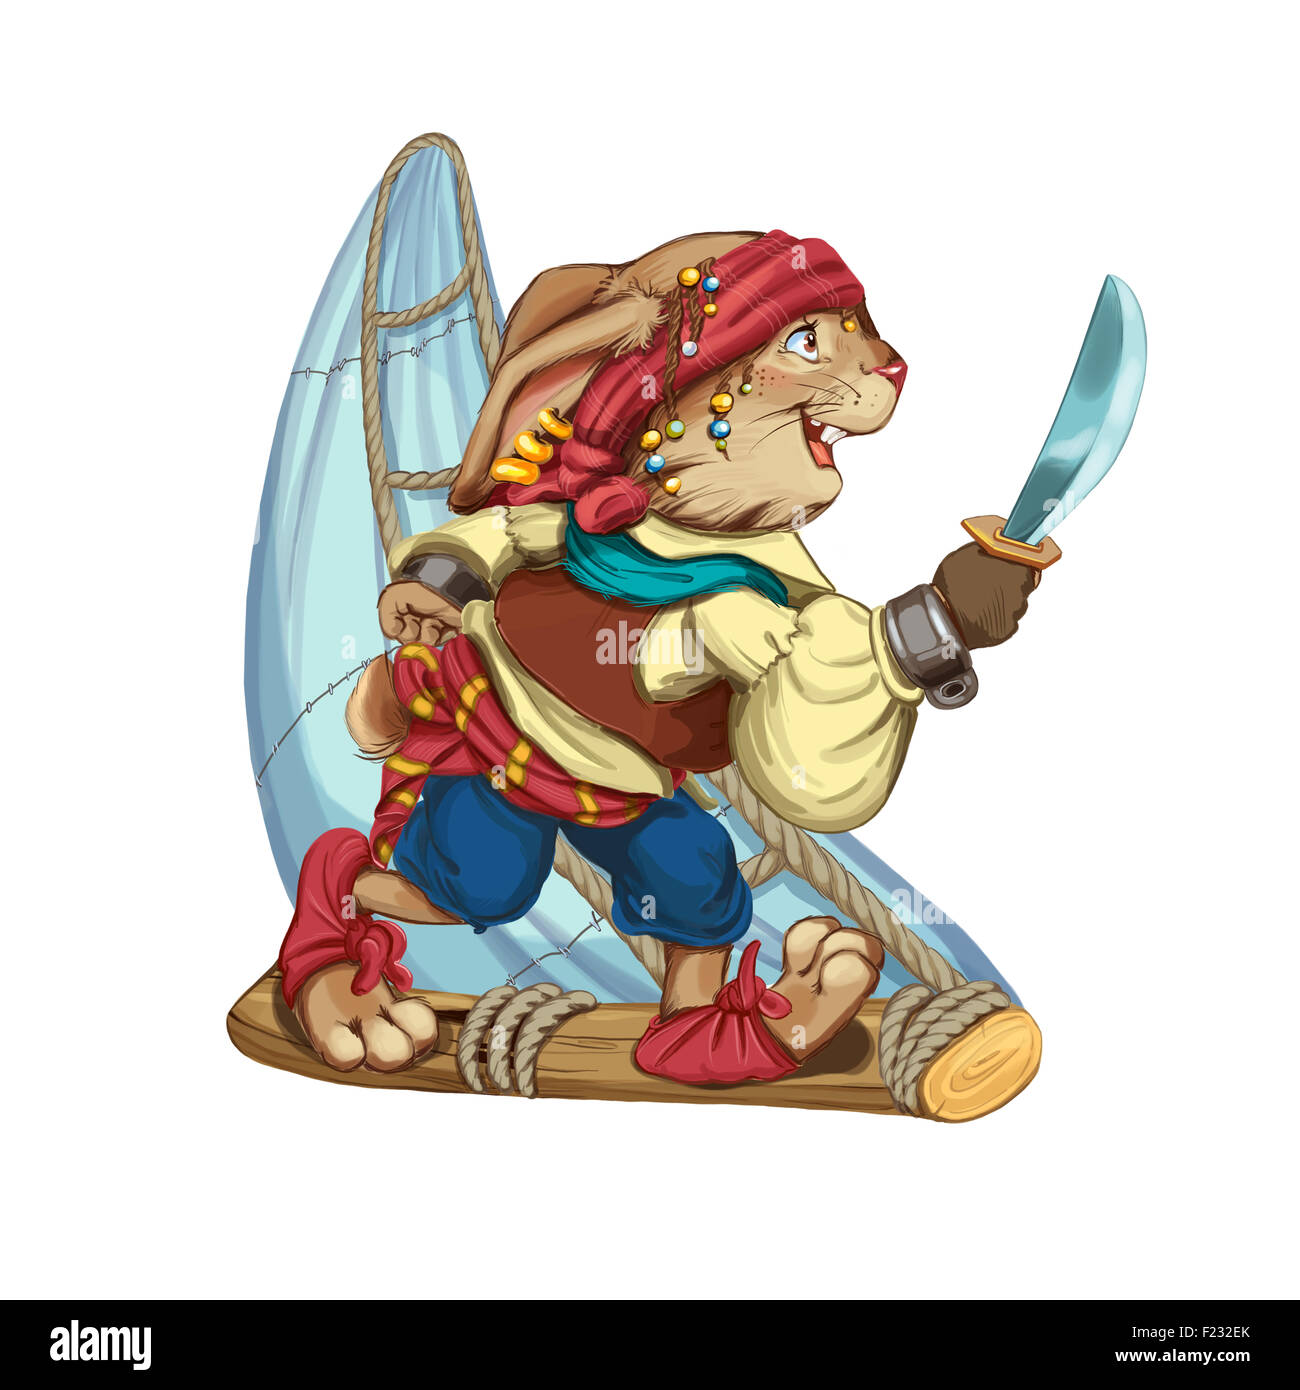 Cartoon hare pirate floats on a sailing vessel from a log and holds a saber in hand. Invitation card for a holiday or birthday. Stock Photo